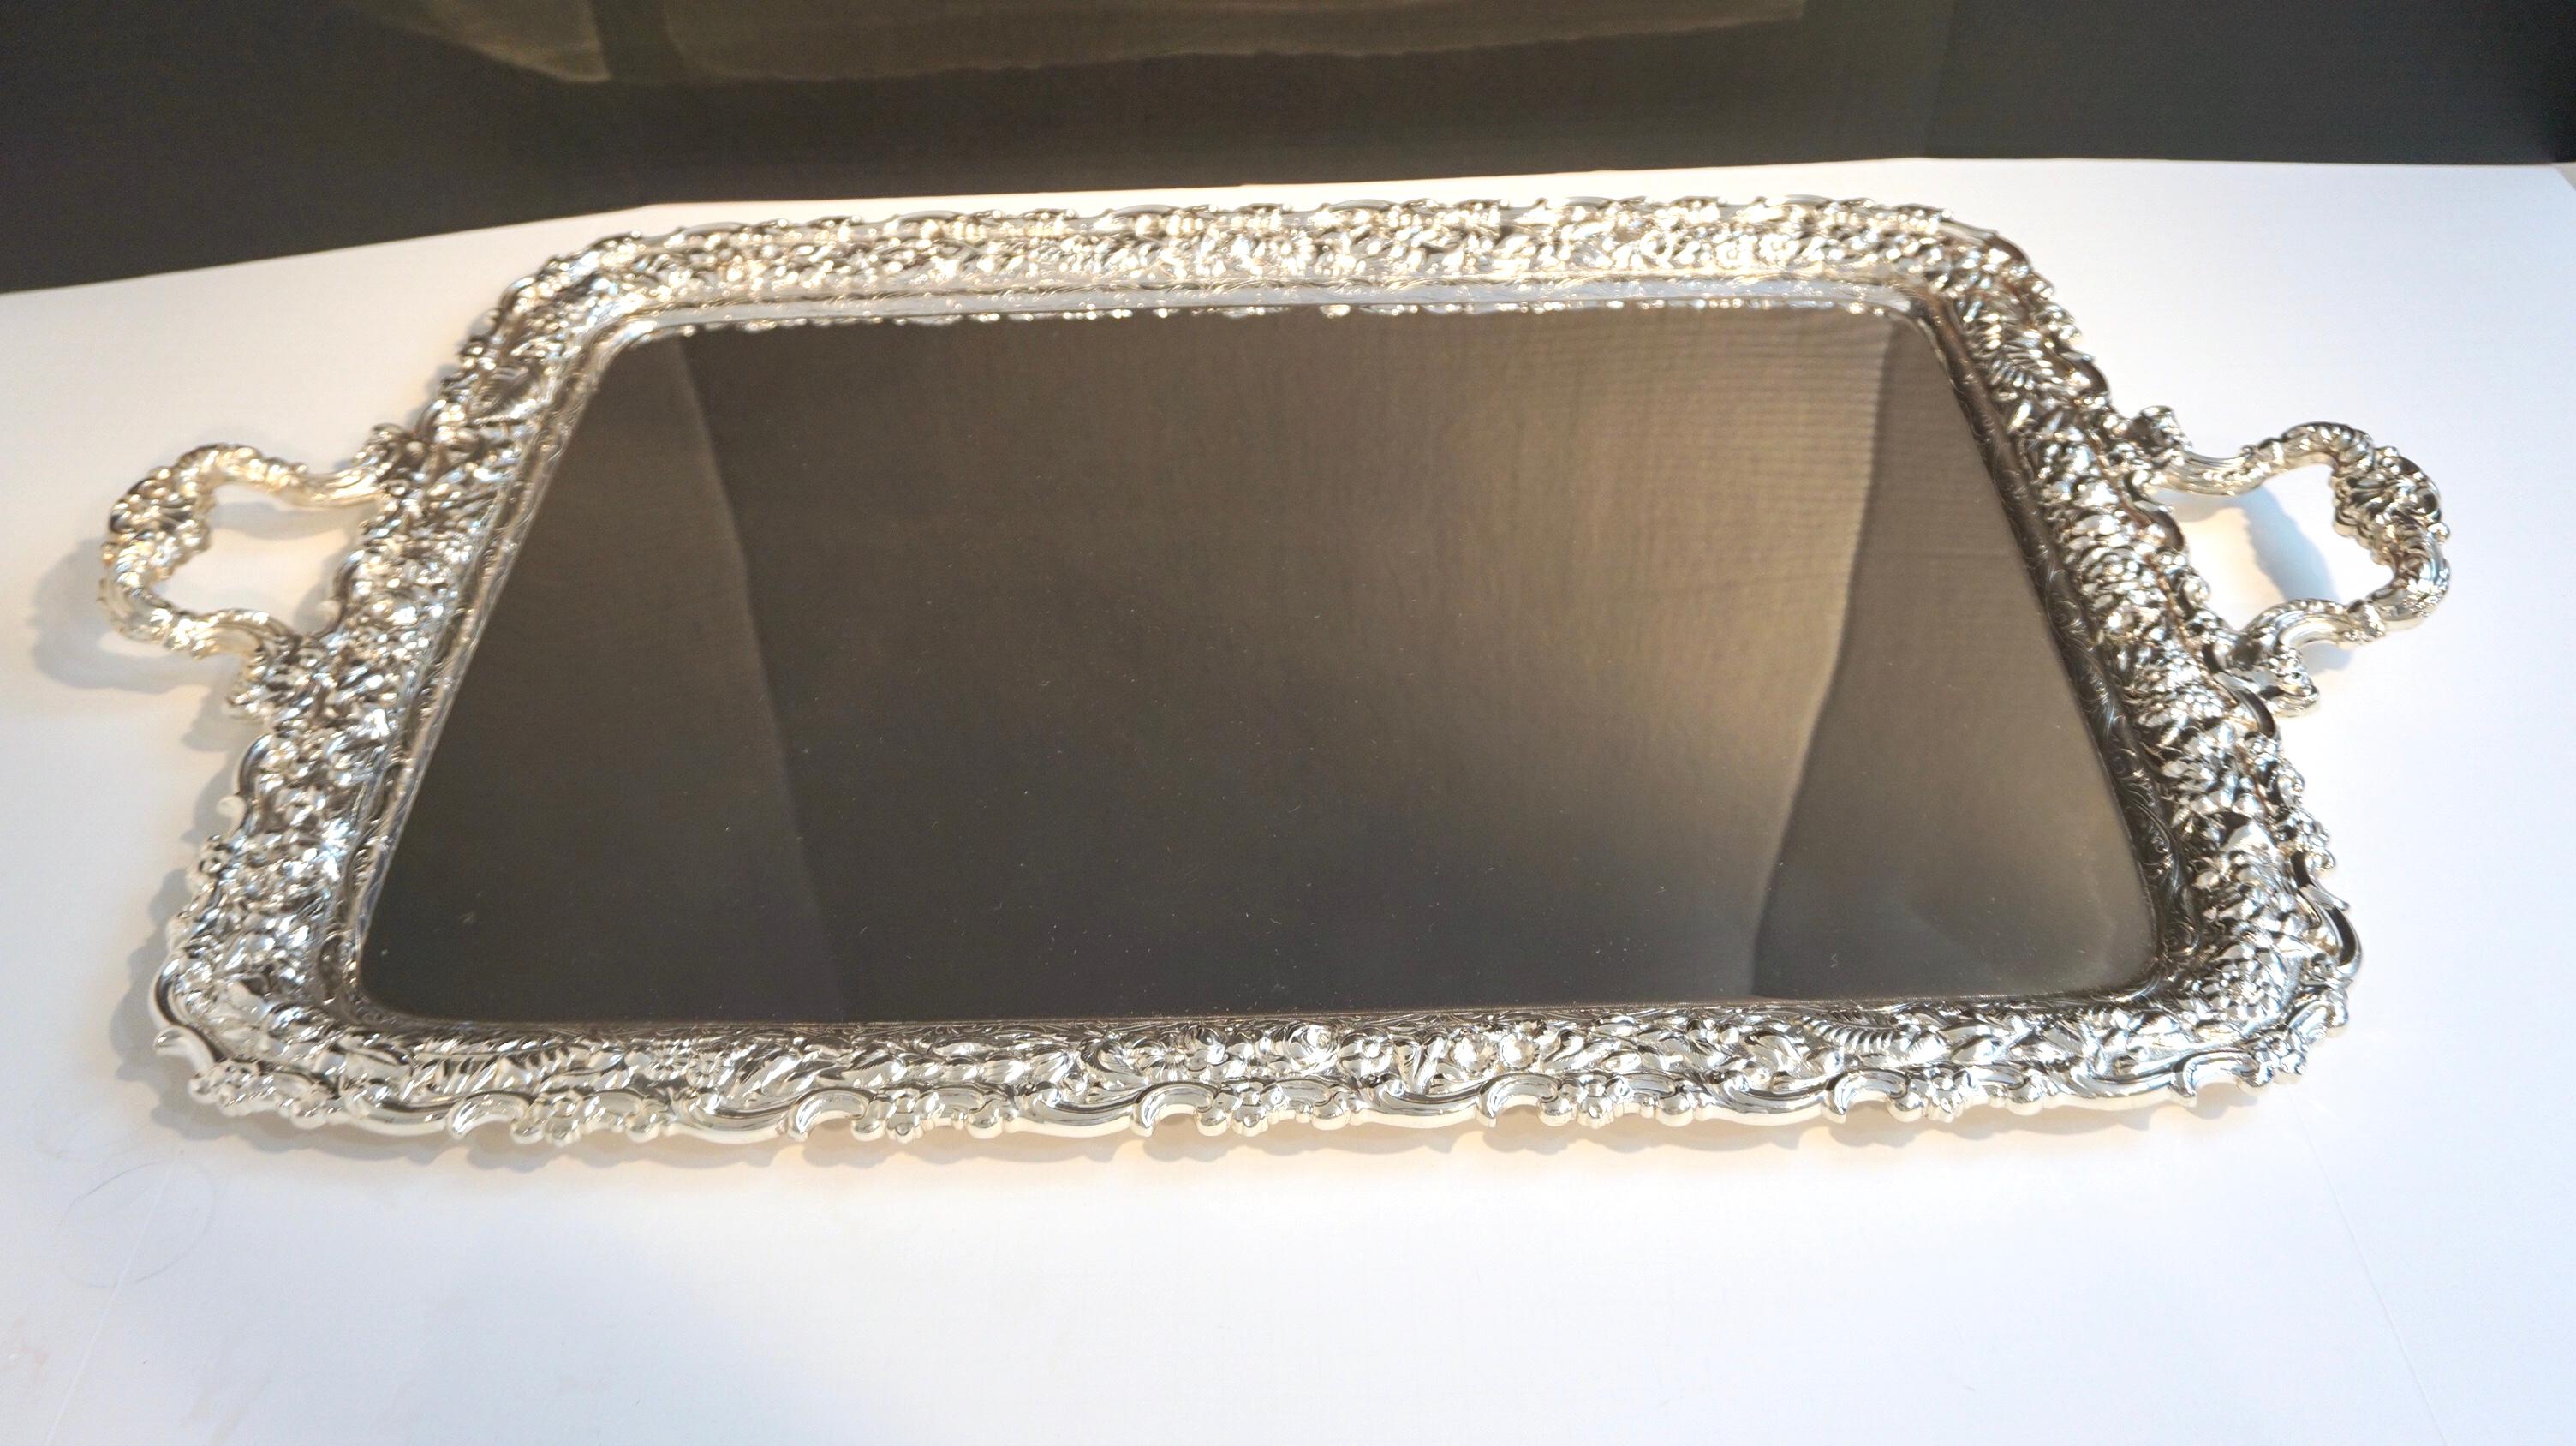 Antique Tiffany & Co. silver soldered repouse tray, triple mint condition, no monogram
Measures: Corner to corner 26.5